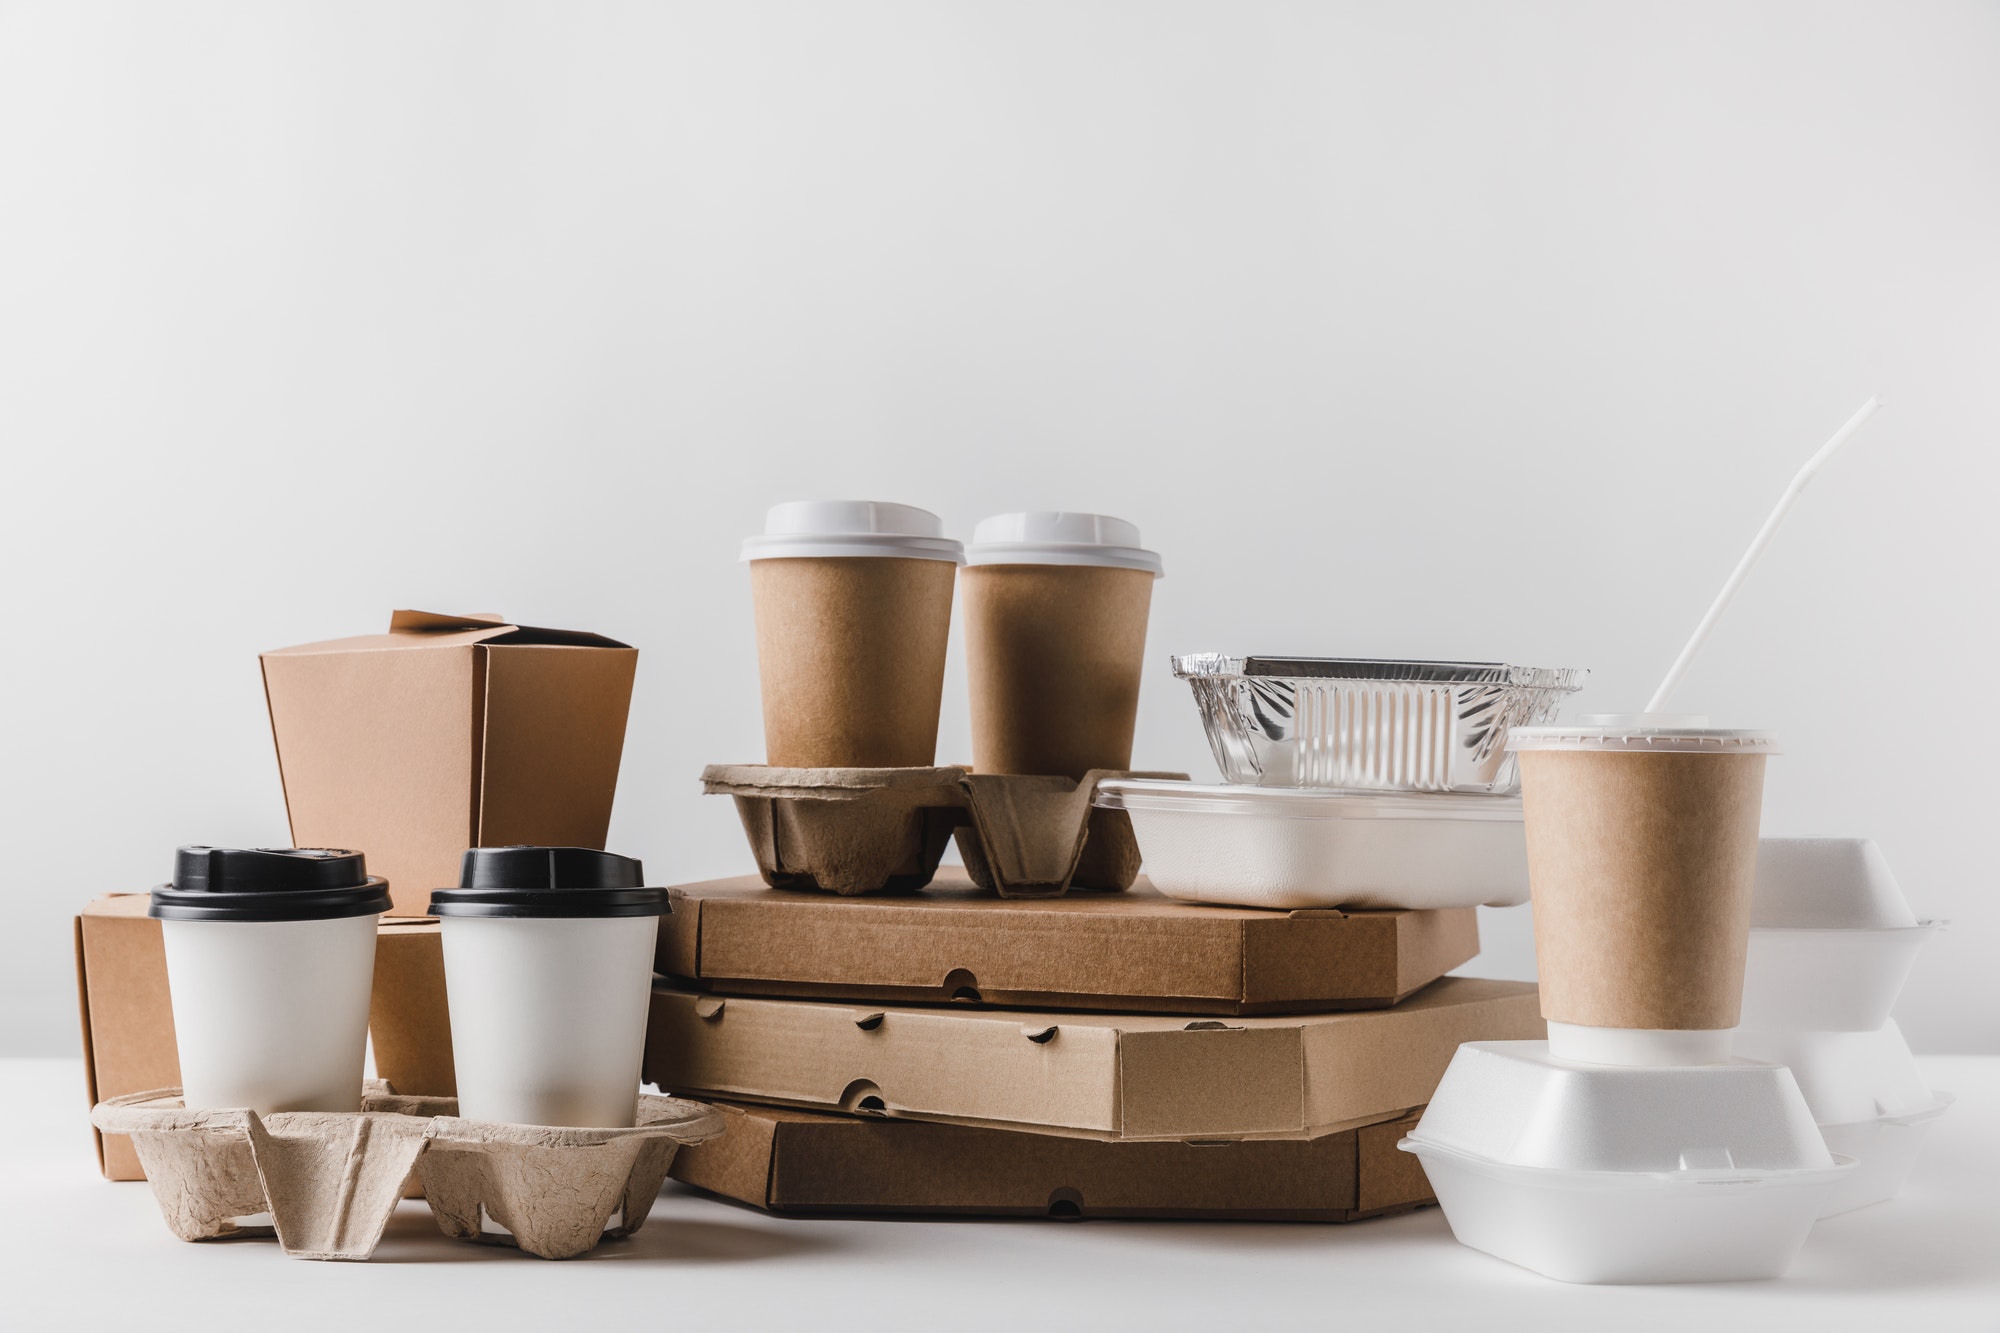 pizza boxes and coffee in paper cups with wok boxes on tabletop